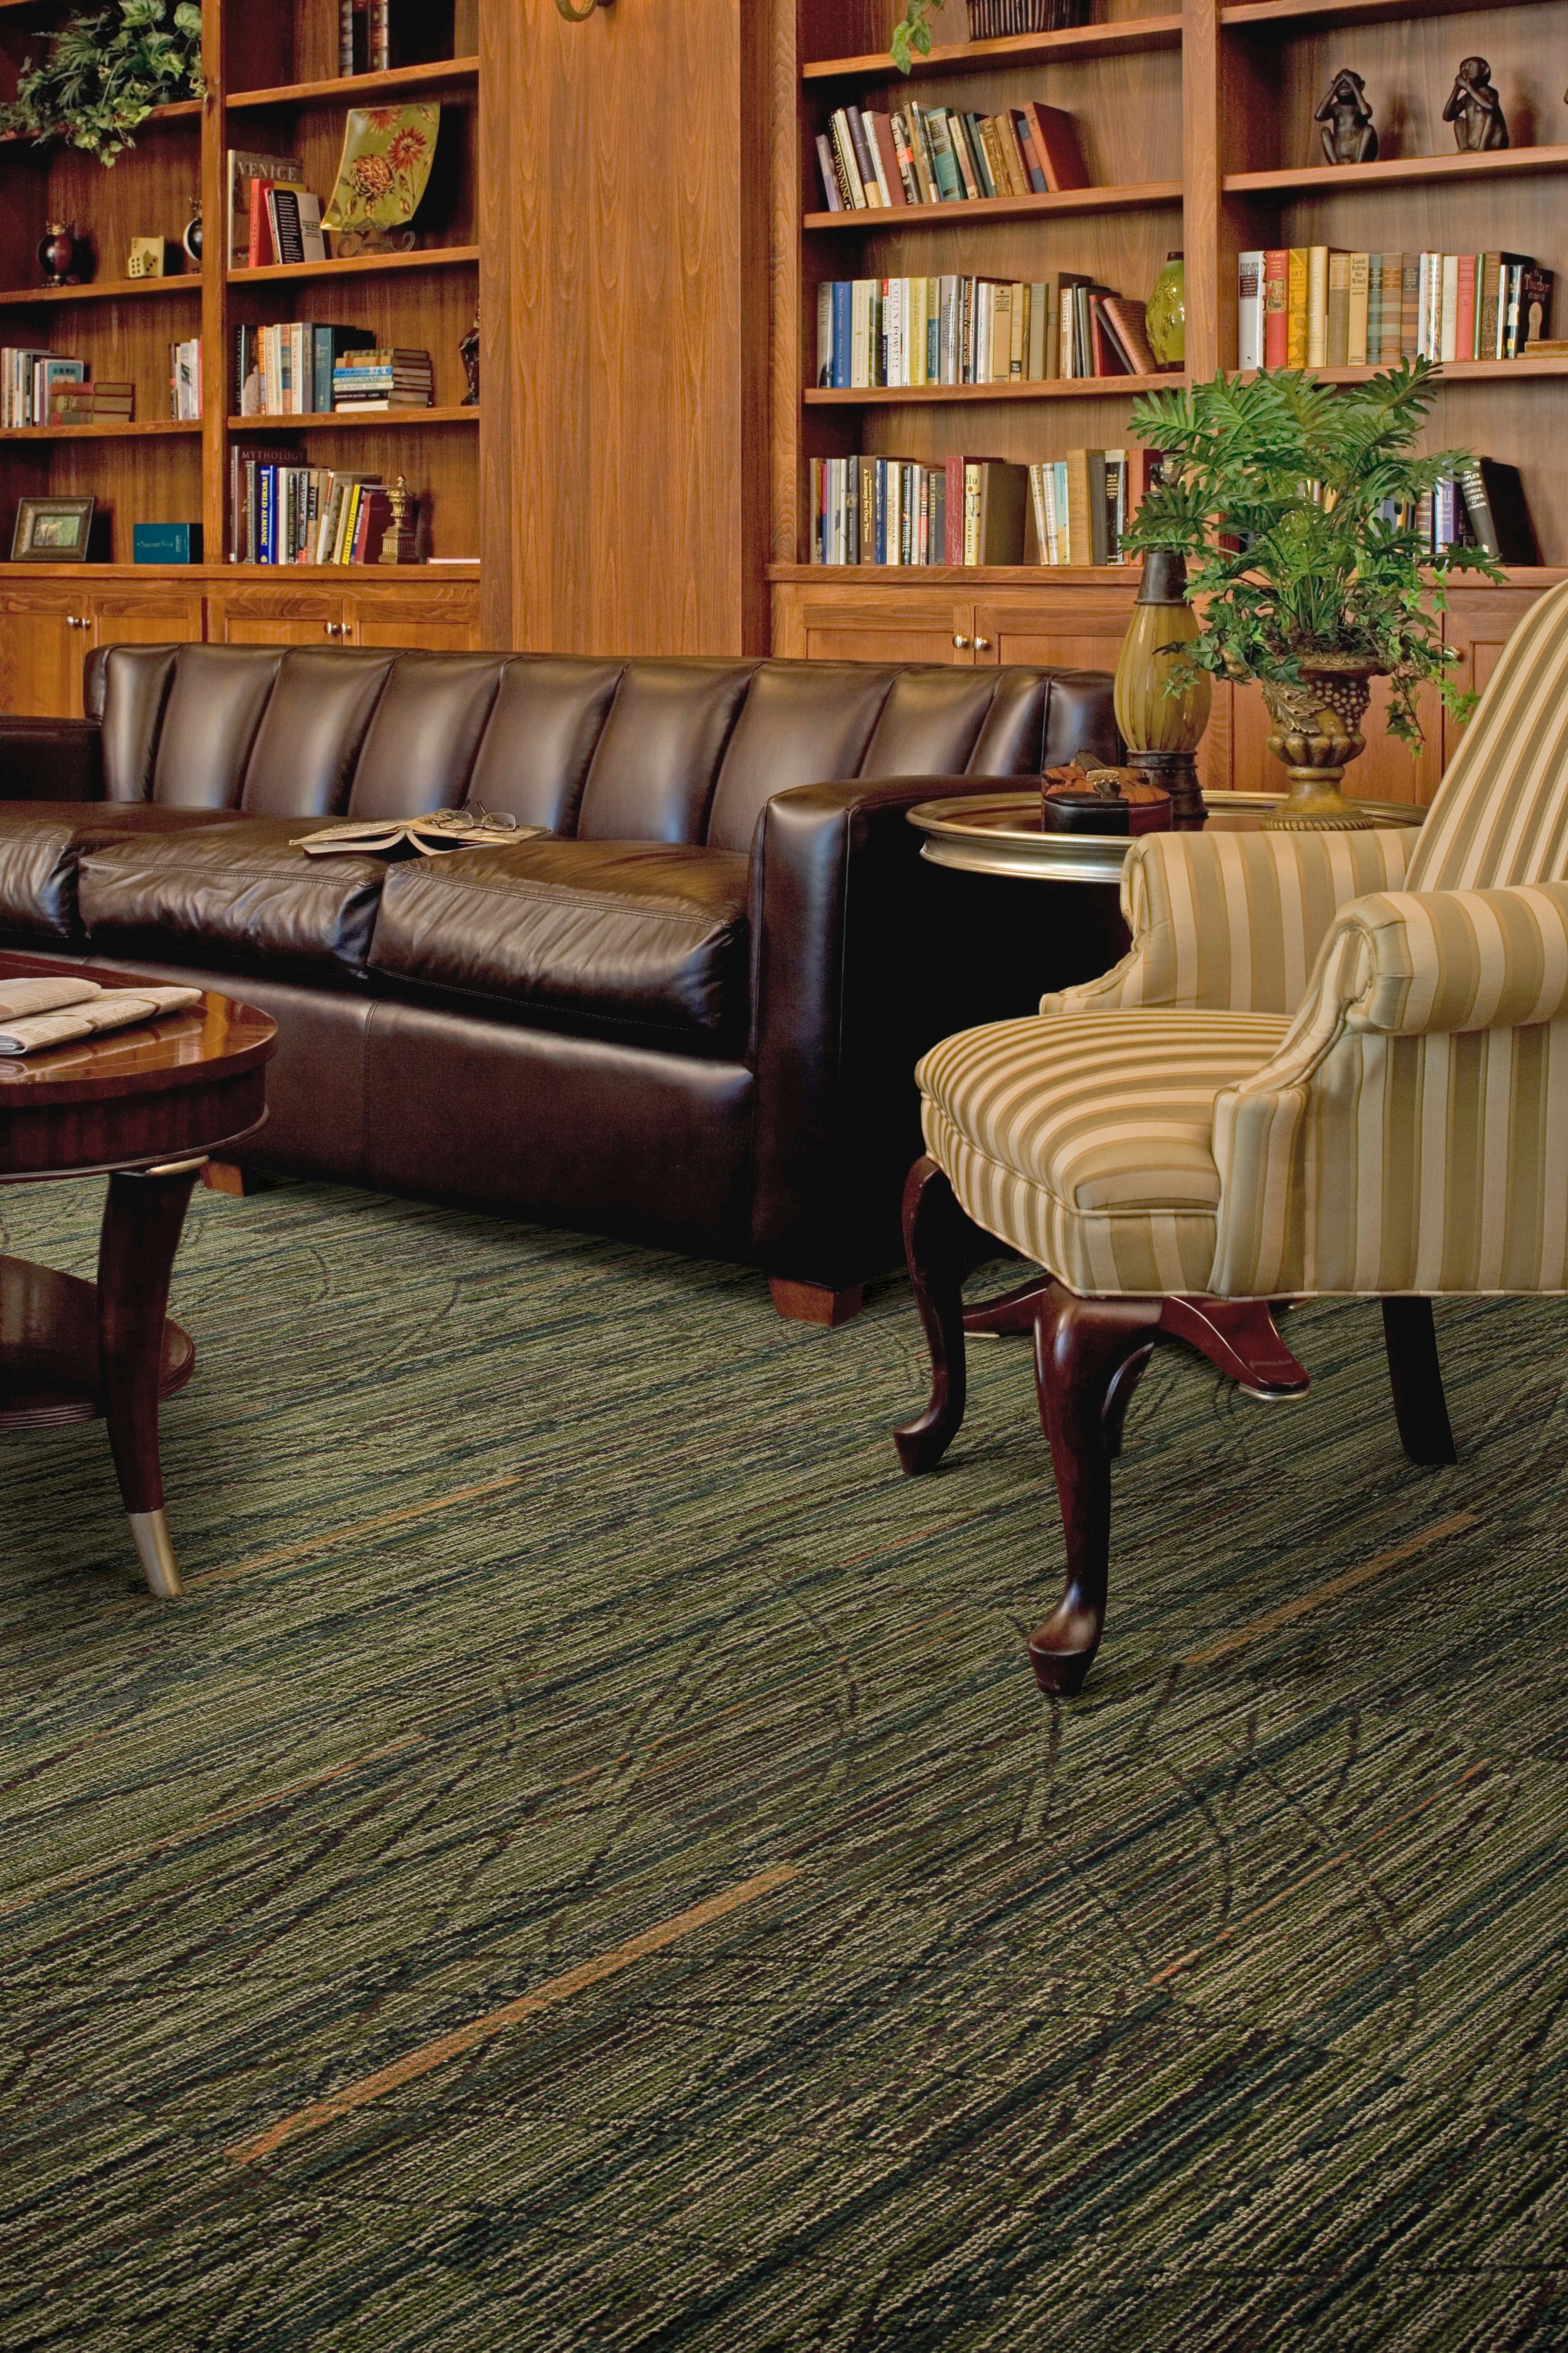 Interface Prairie Grass carpet tile in senior housing seating area with leather sofa and bookshelves imagen número 10